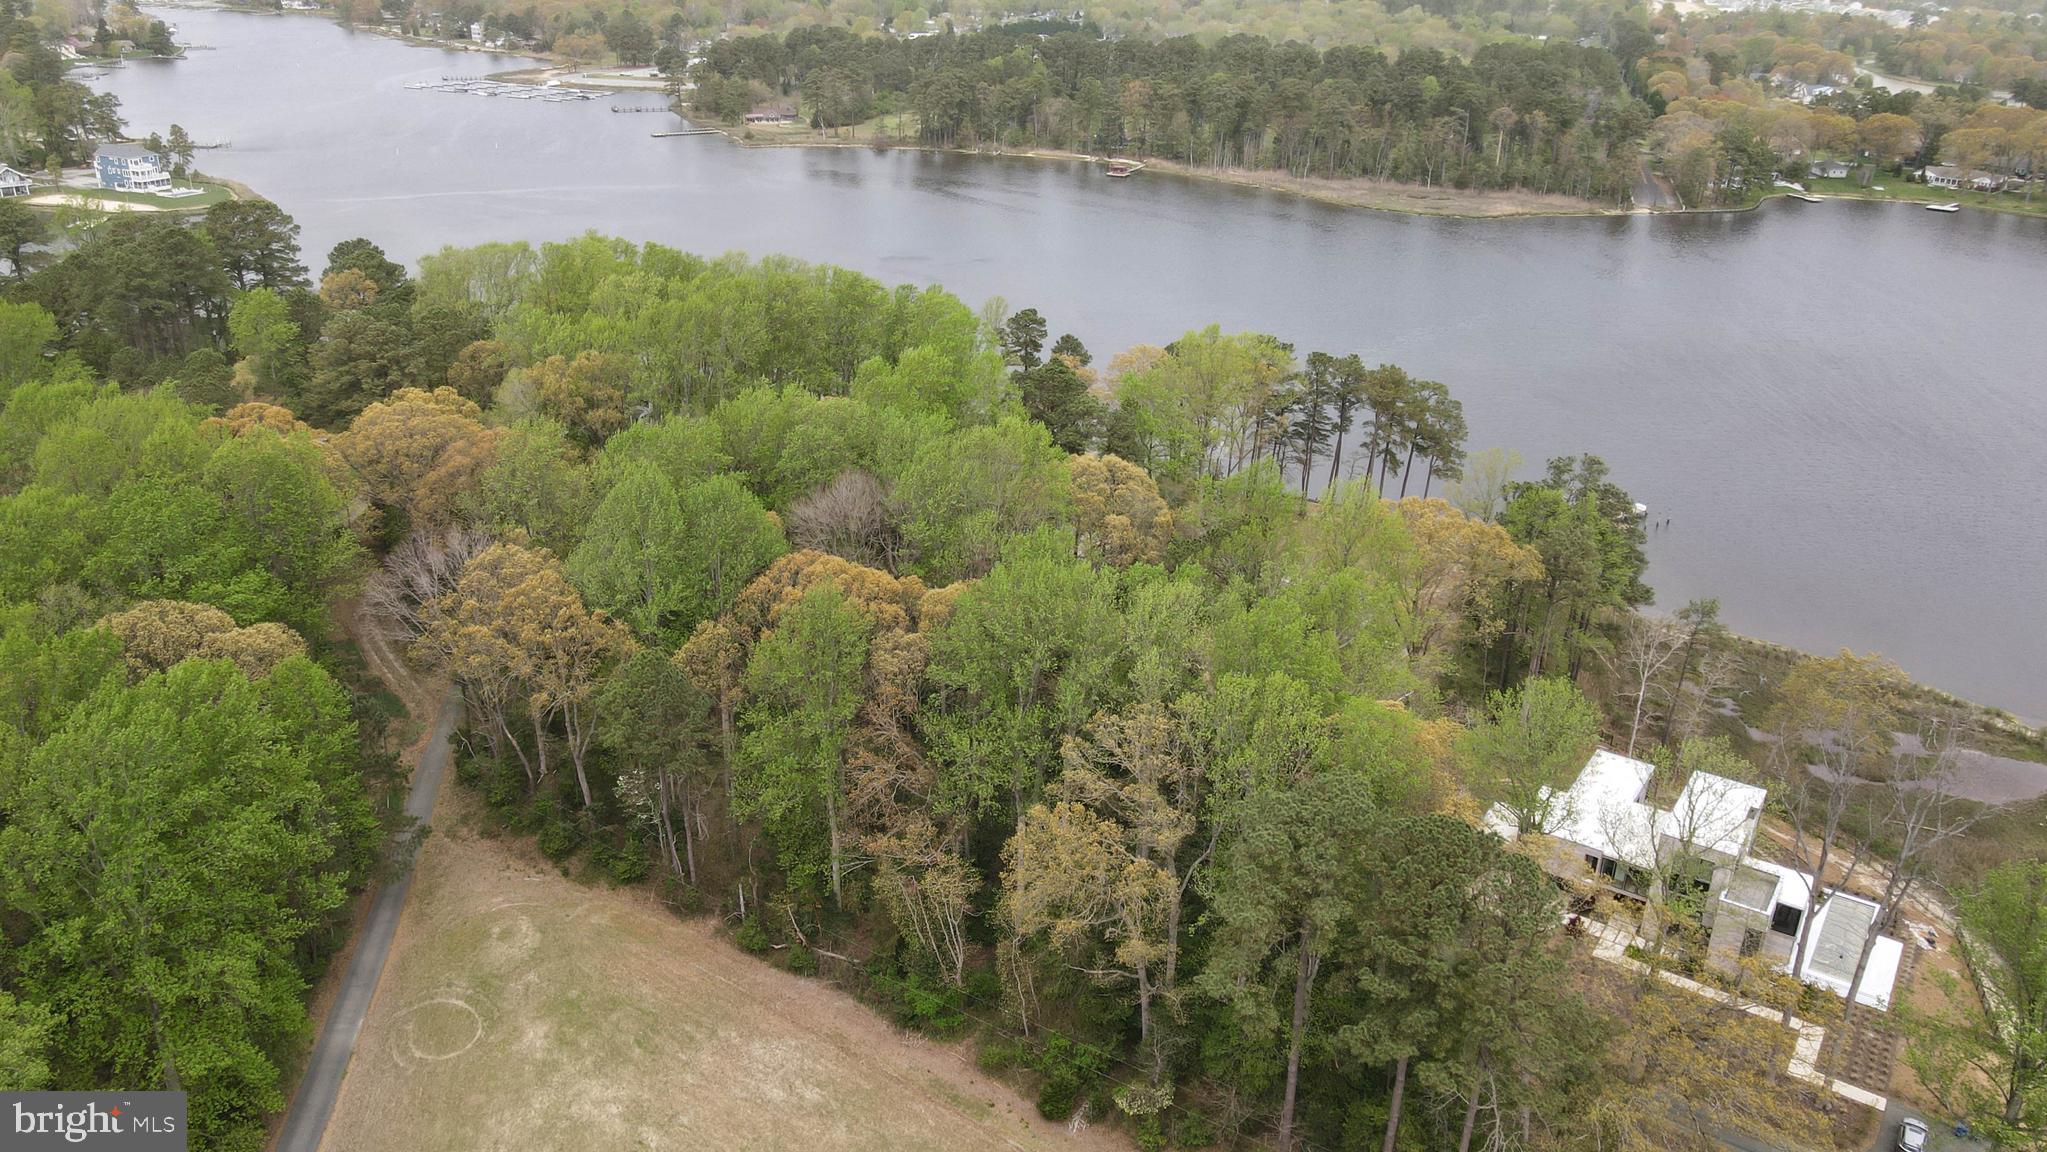 an aerial view of a houses with lake view